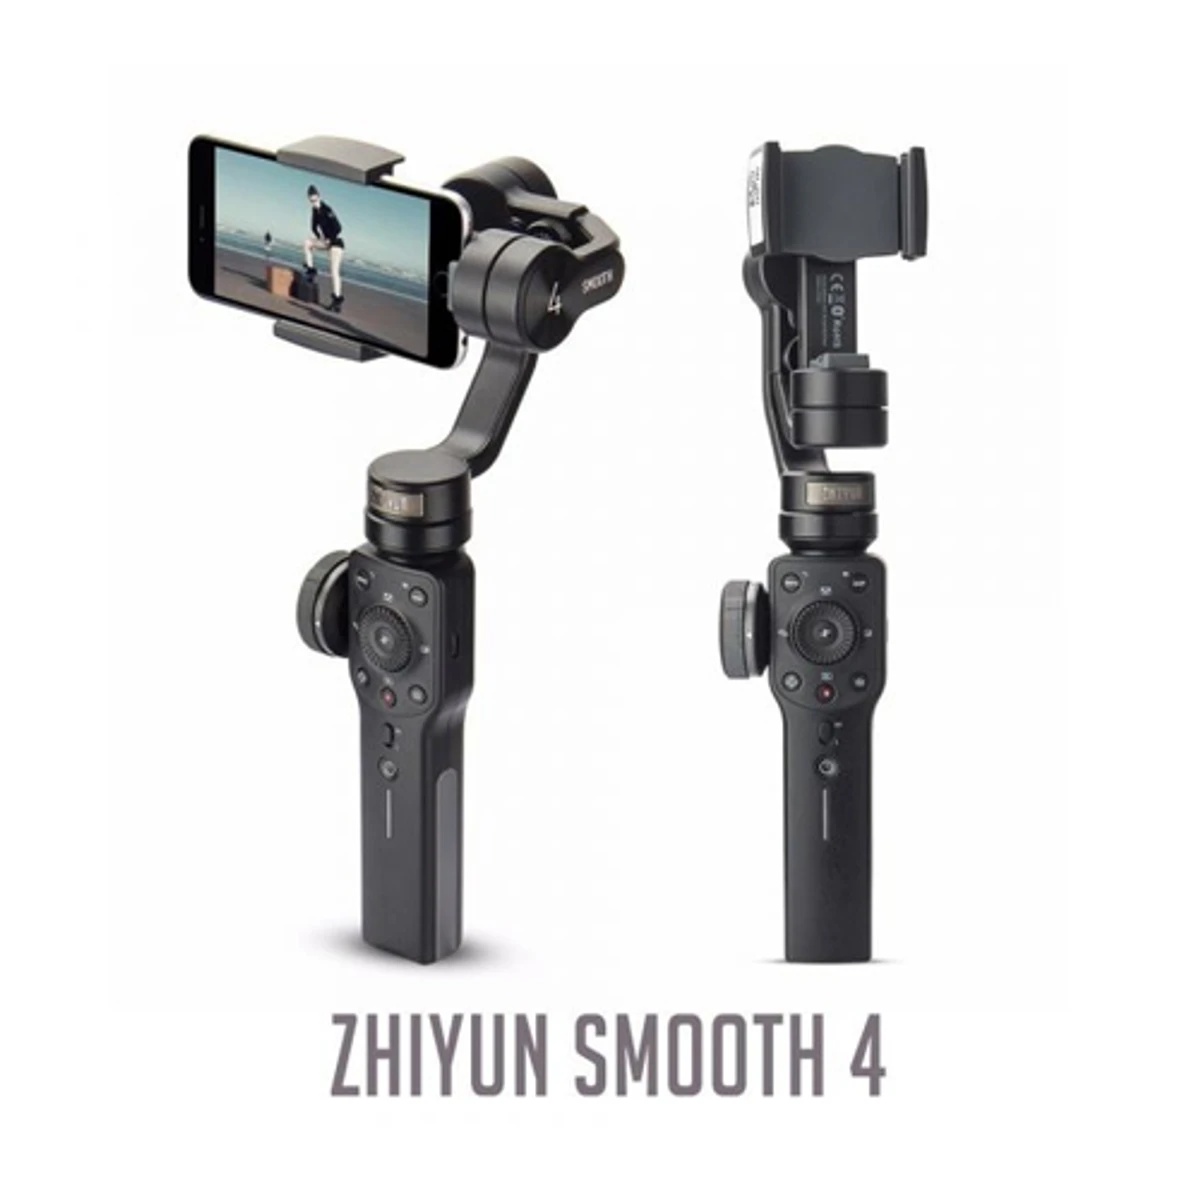 Zhiyun Smooth 4 Smartphone Gimbal - Best For Mobile Filmmakers